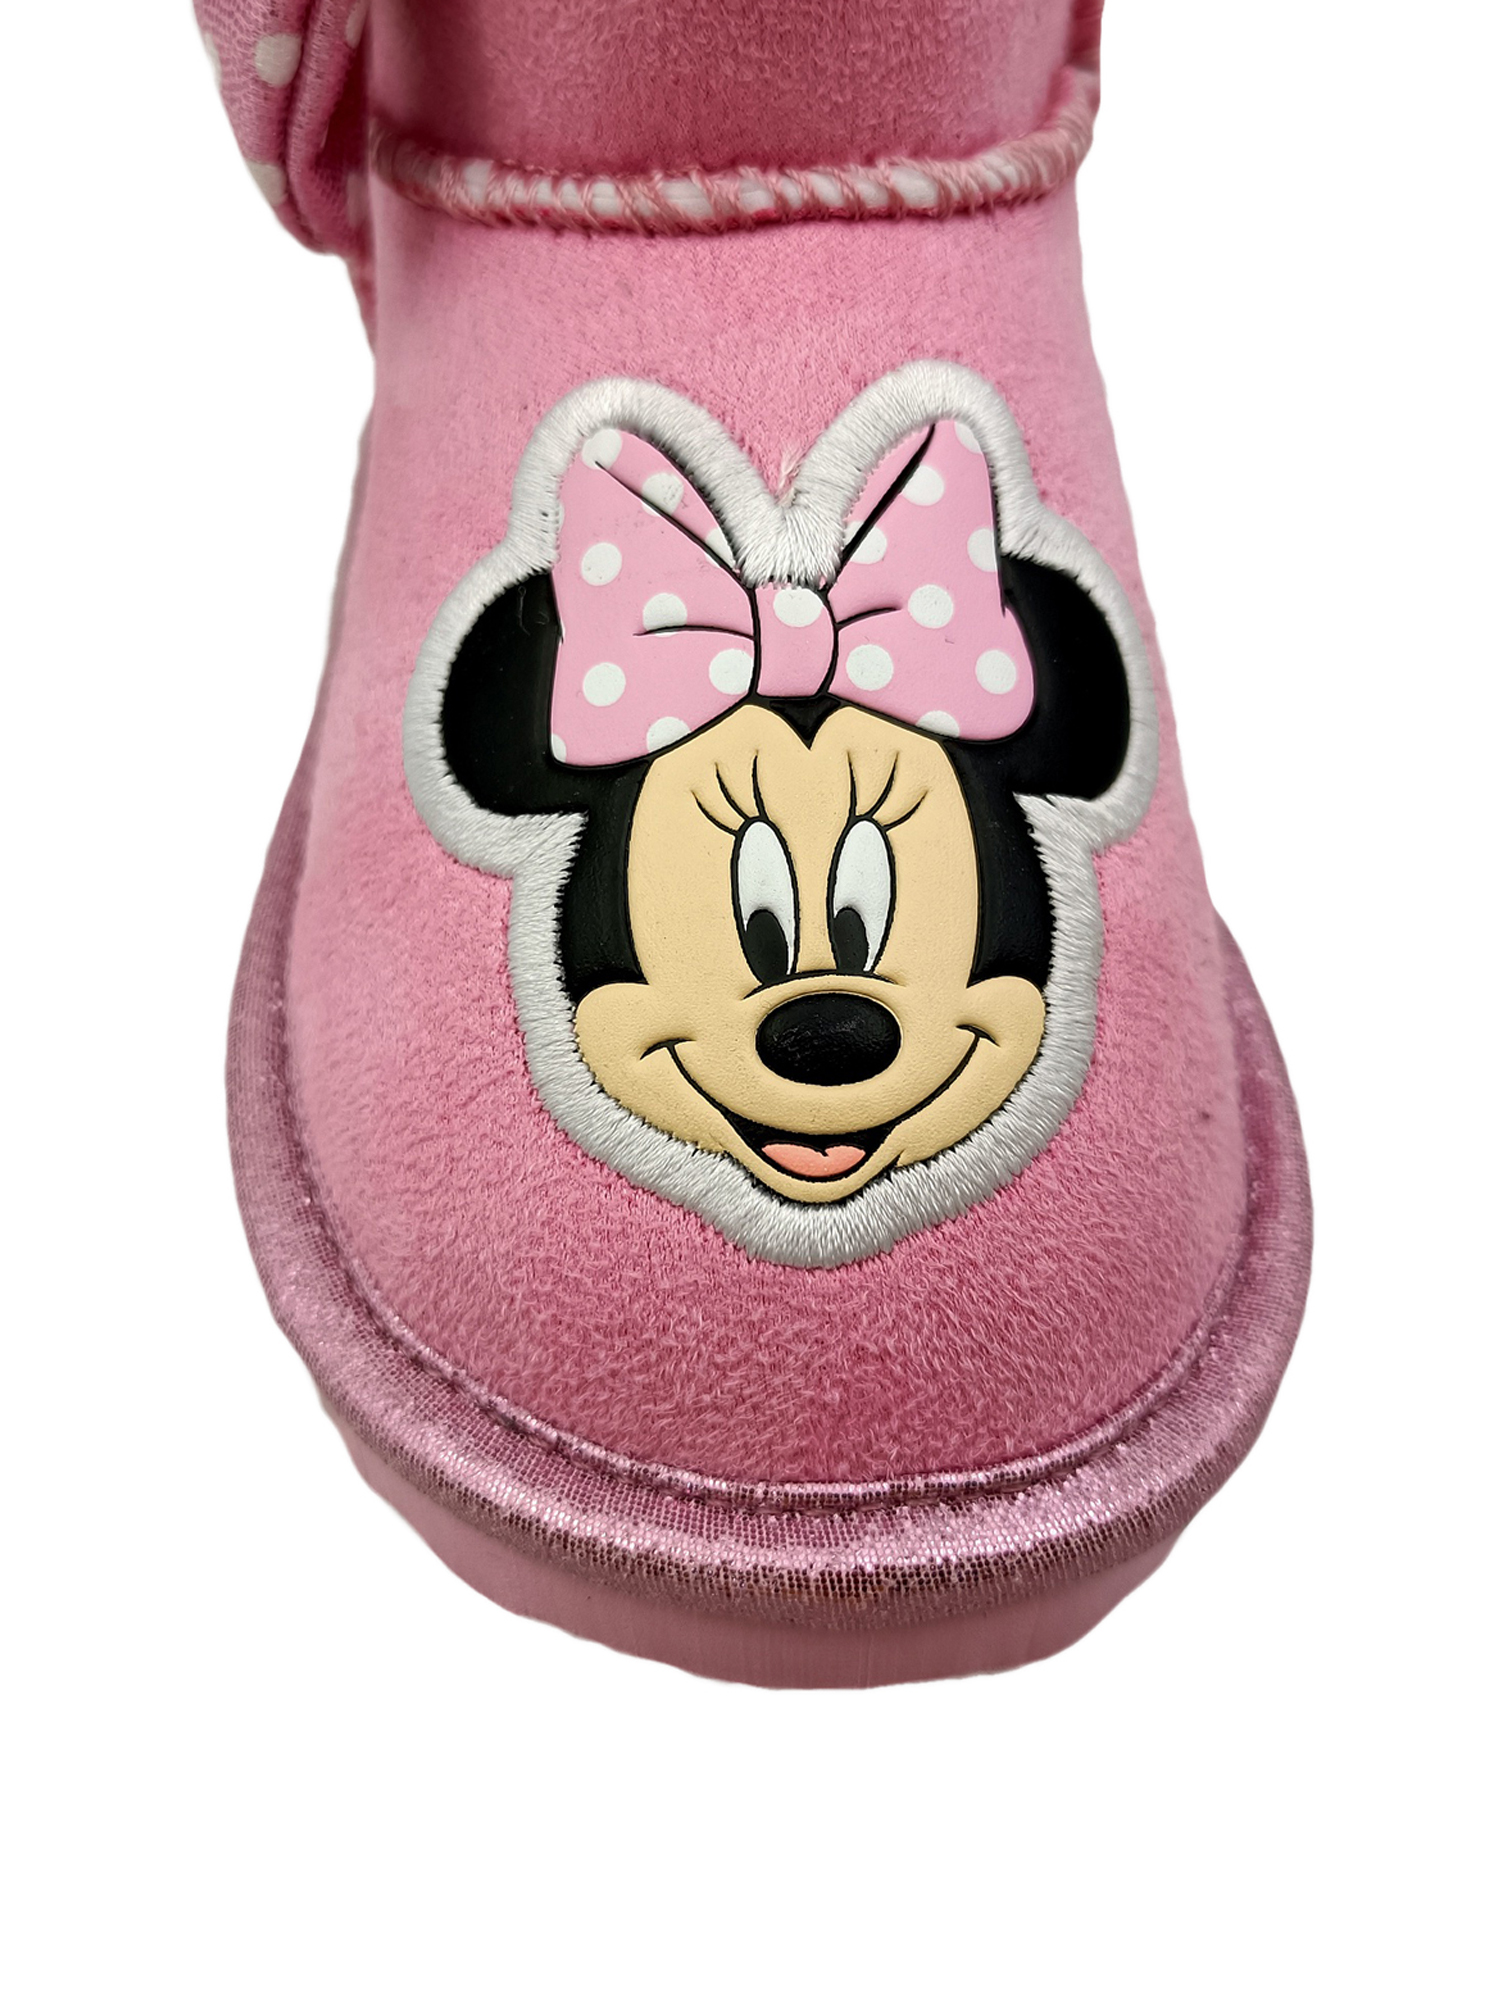 Disney Minnie Mouse Cozy Faux Shearling Winter Boot (Toddler Girls) - image 4 of 6